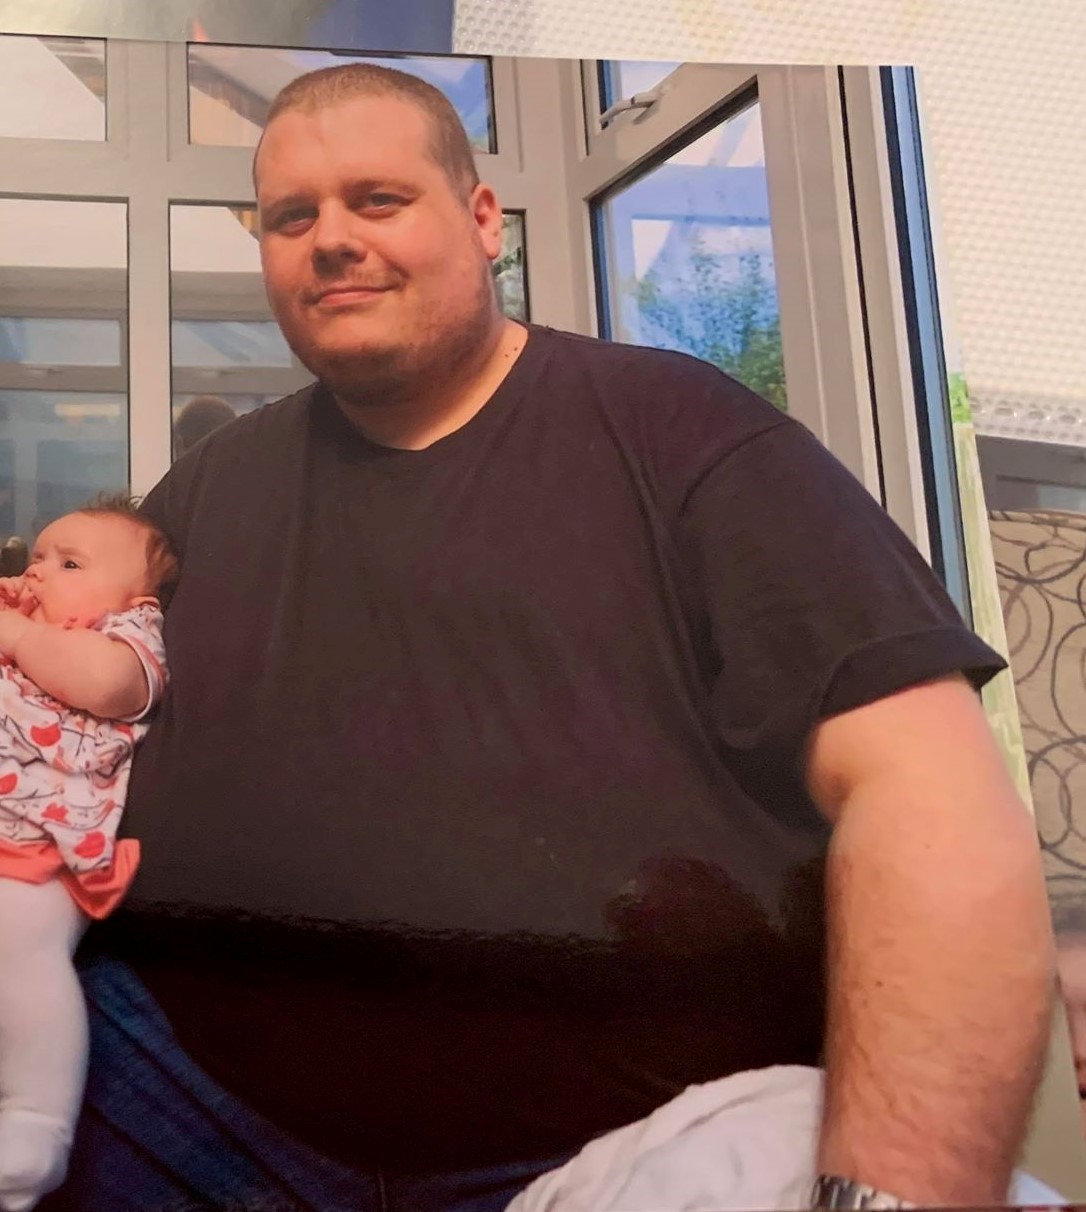 Obese dad of two who found it hard to drive as his belly would get wedged against the steering wheel has ditched more than 200 lbs to be crowned Slimming World’s Man of the Year. (Matthew Newby, SWNS/Zenger)